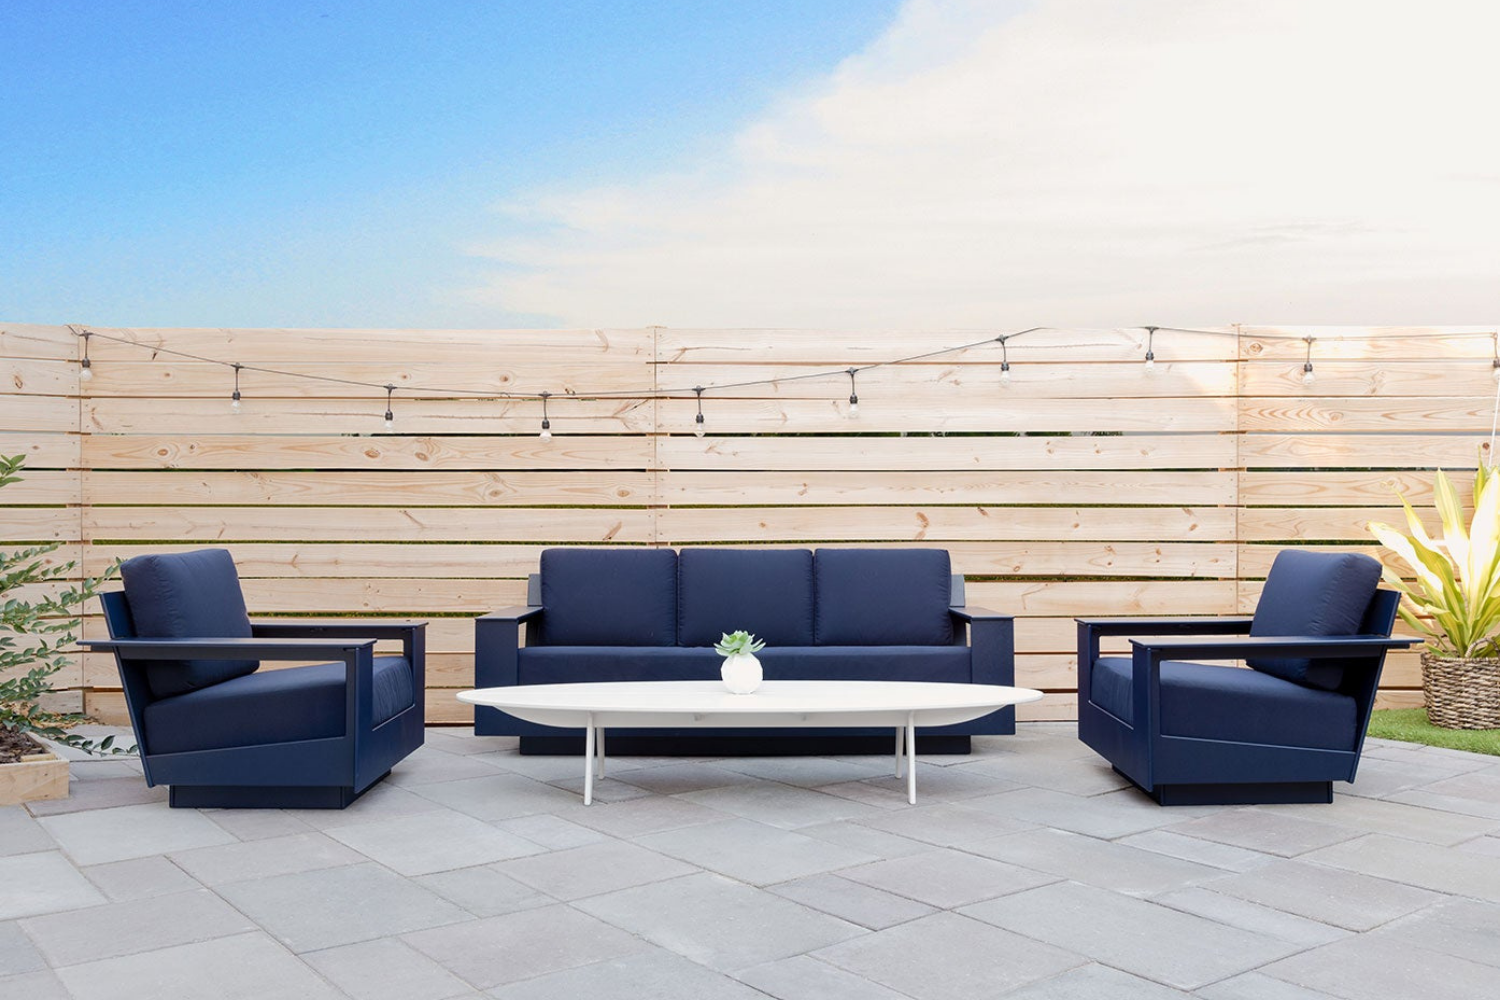 coddington-design-marina-ca-investing-in-outdoor-furniture-navy-sofa-made-of-recycled-high-density-plastic-from-loll-design